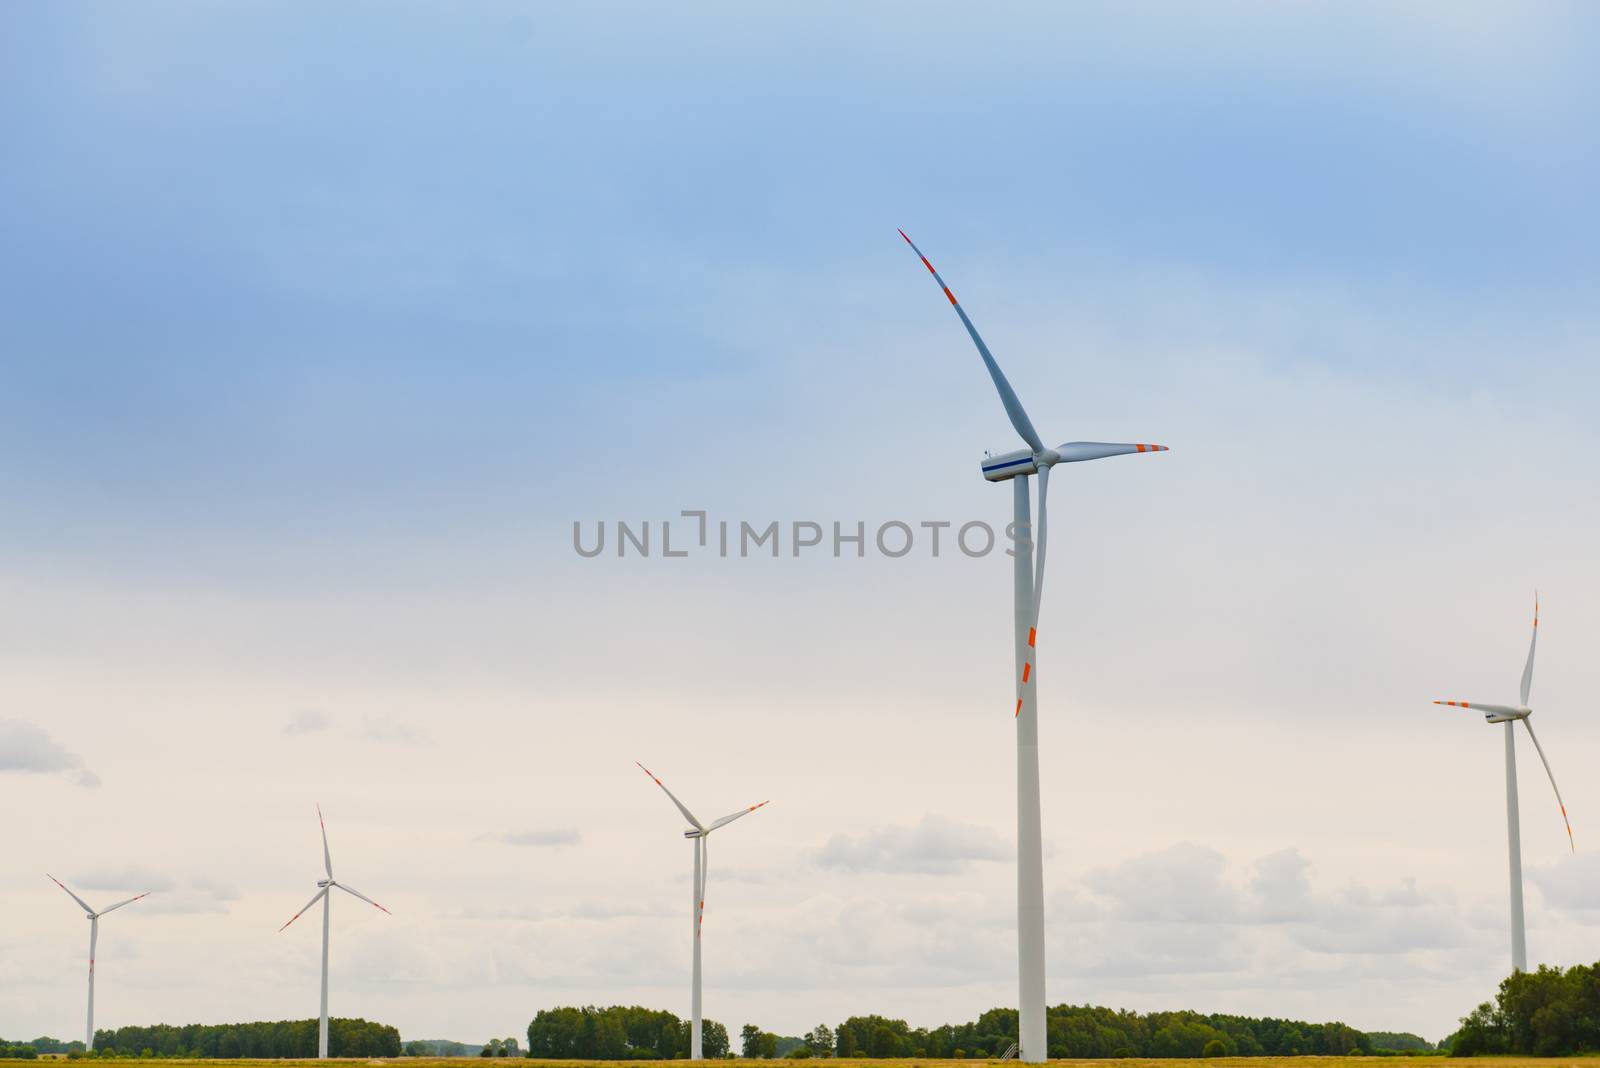 Windturbine. Eco power renewable energy production from wind. Windmill saves the earth's natural ingredients. Green ecology and pure electricity.